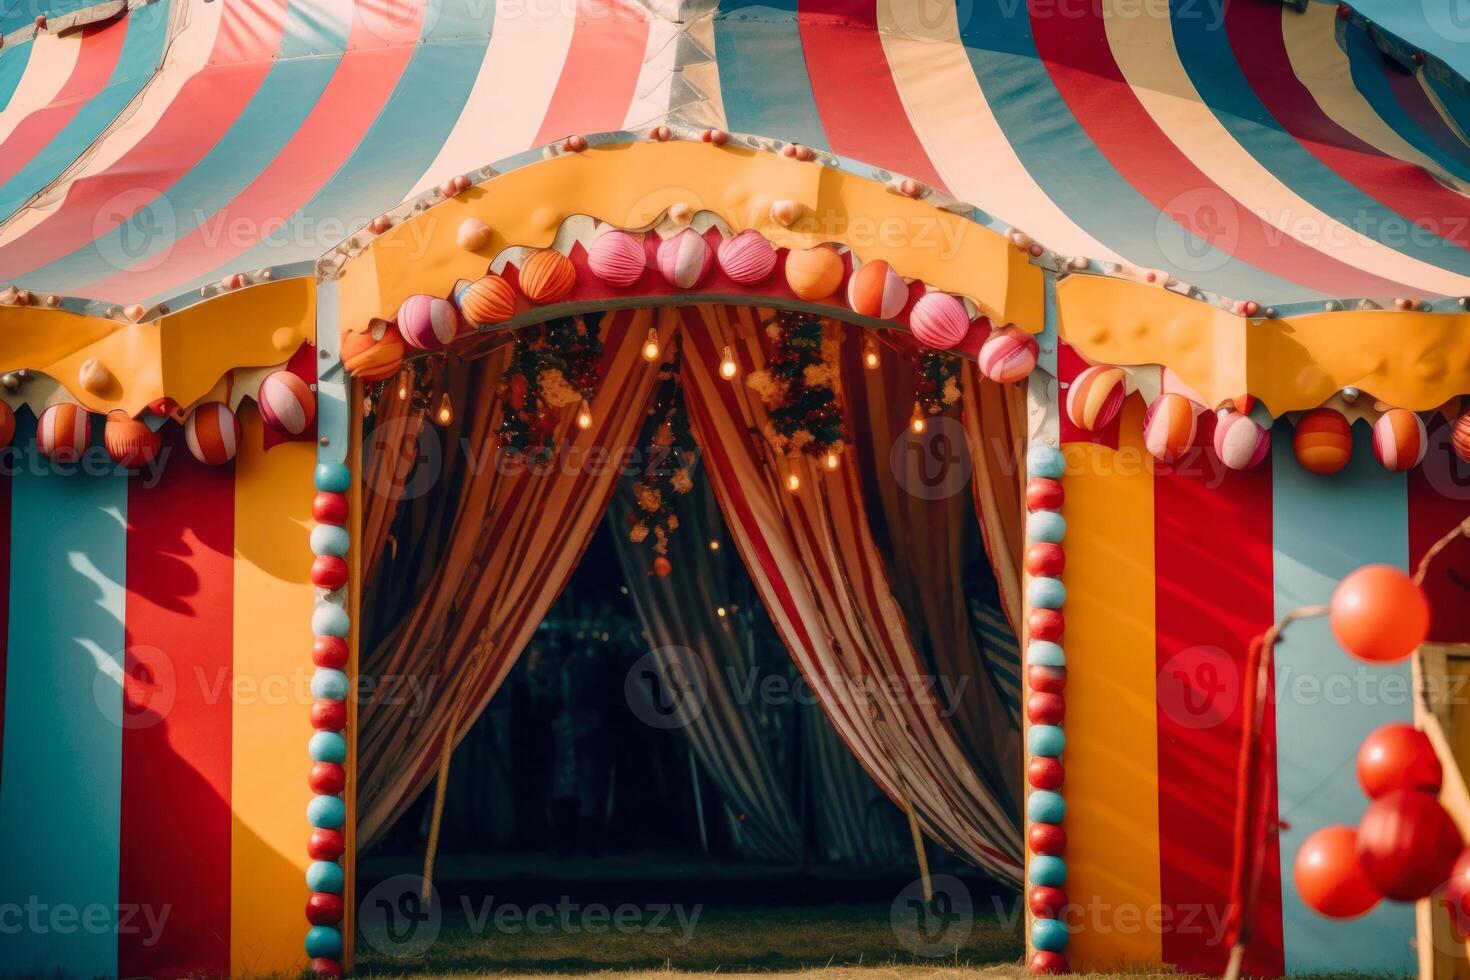 color circus tent photo